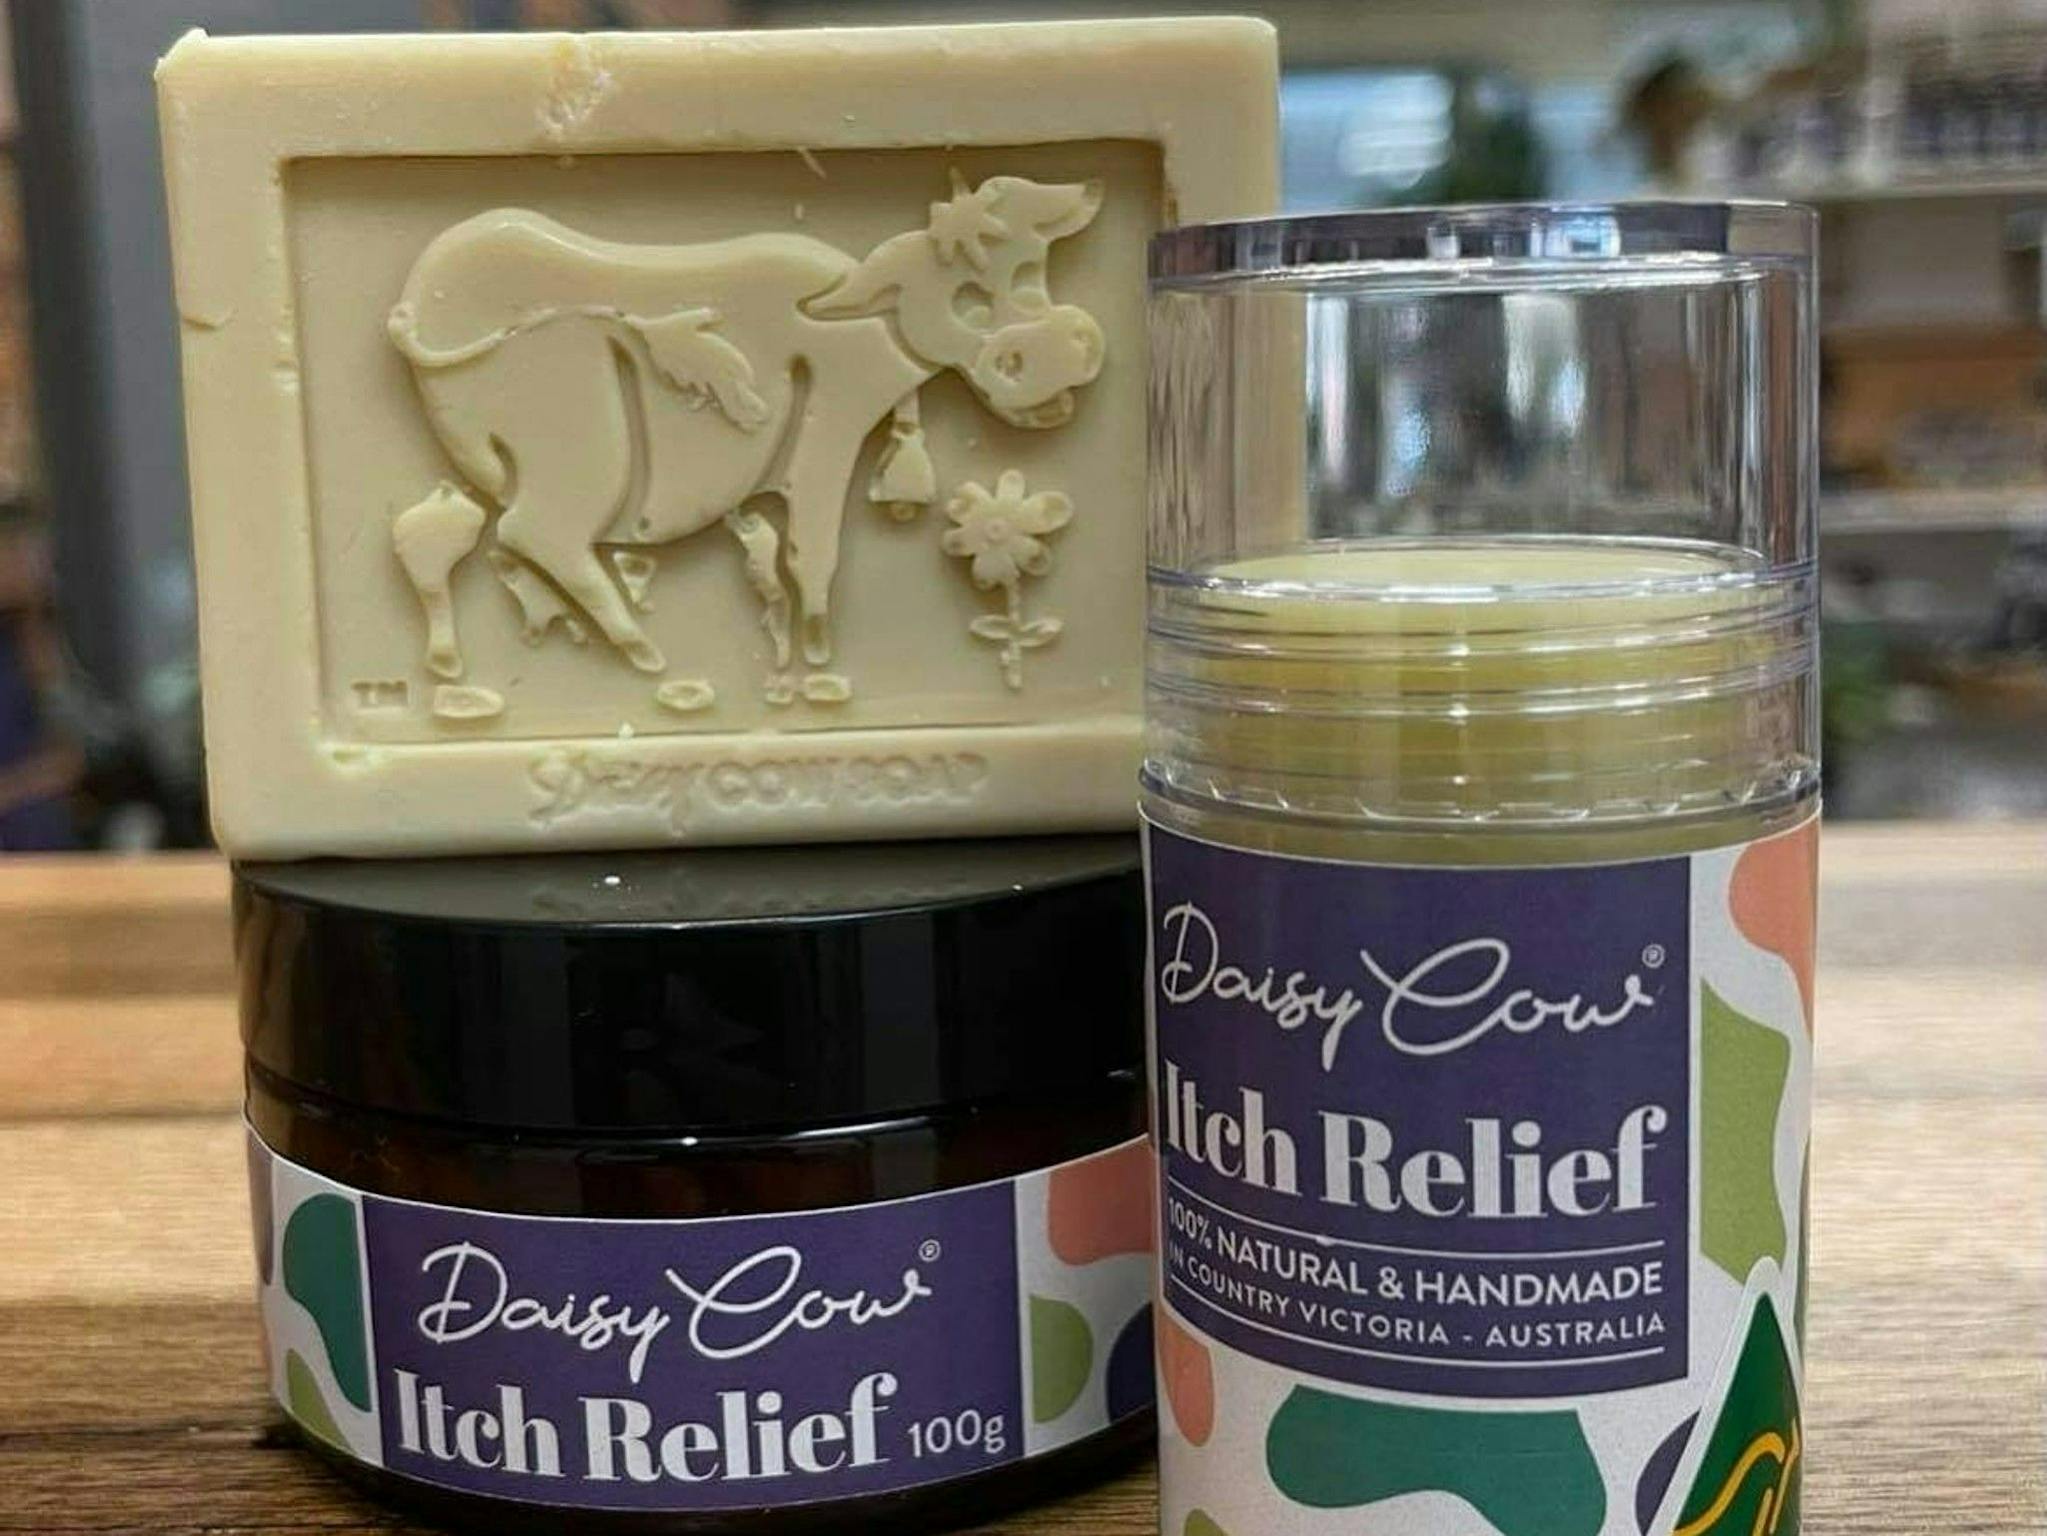 Itch Relief in a tub and applicator together with natural Daisy Cow soap